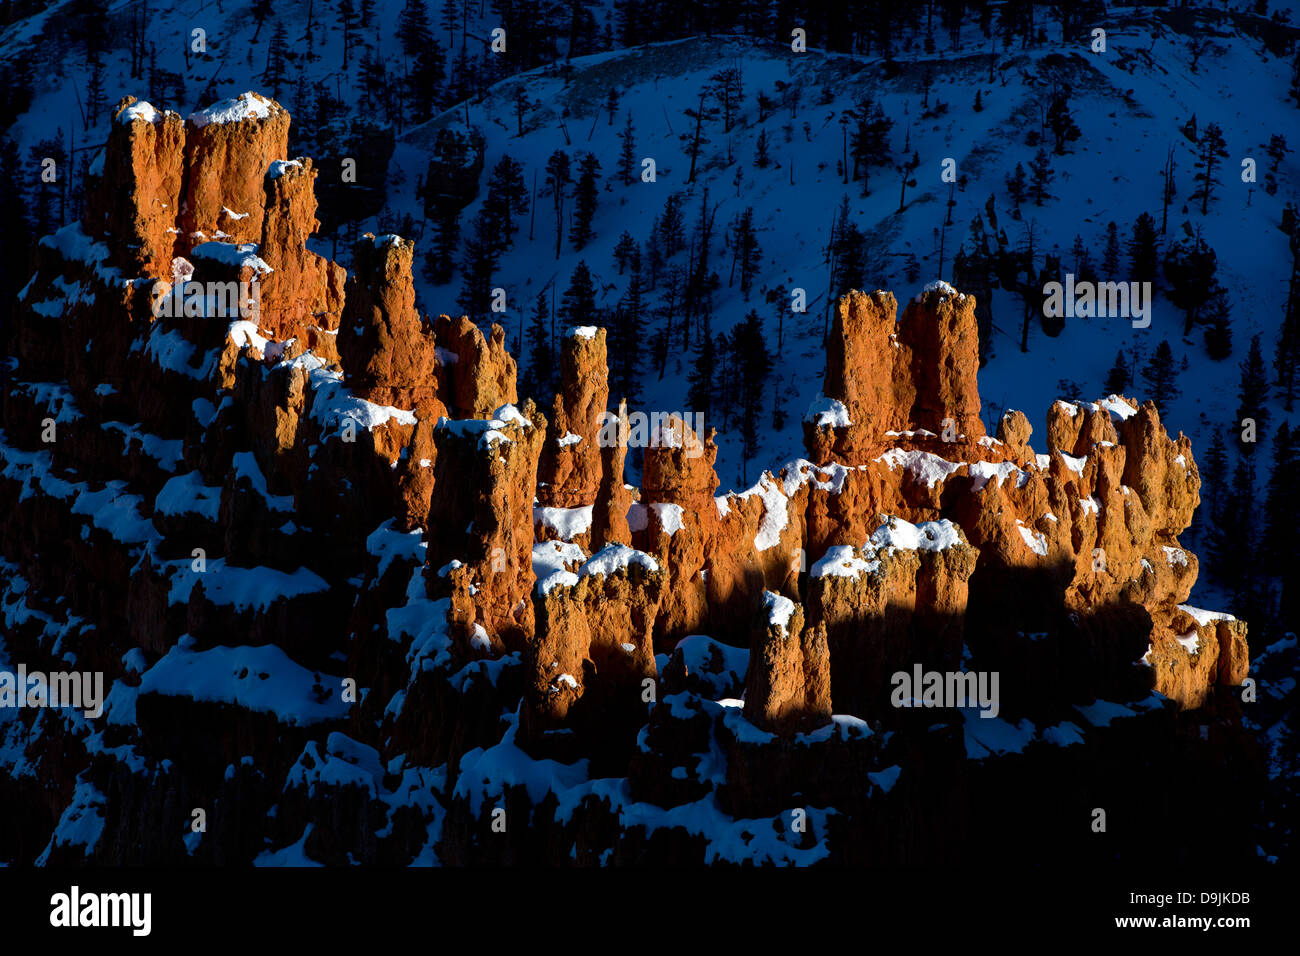 Hoodoo rock formations and snow at sunset, Bryce Amphitheater, Bryce Canyon National Park, Utah, United States of America Stock Photo